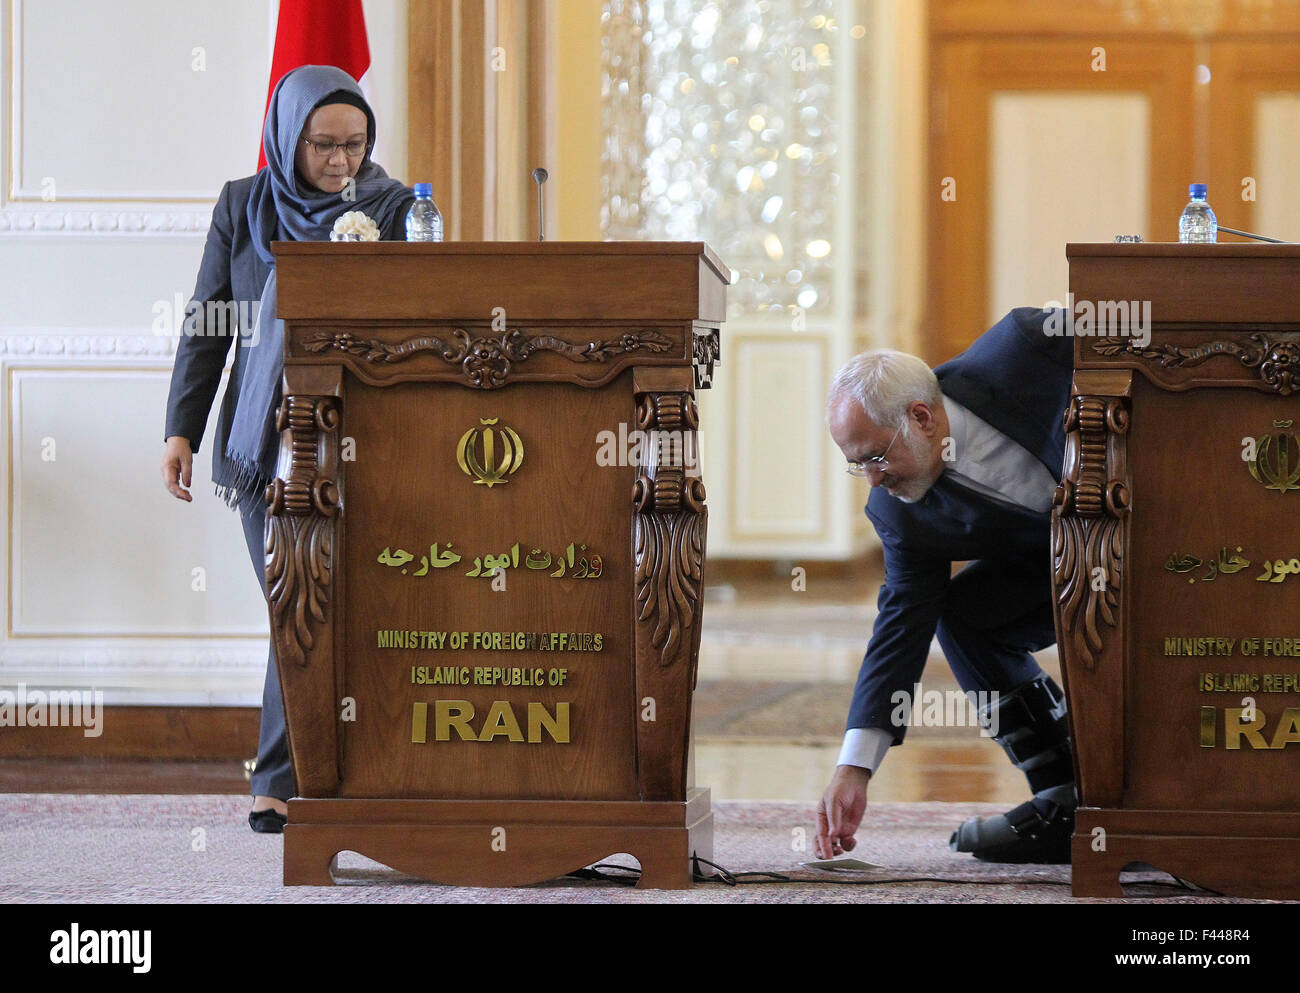 Tehran, Iran. 14th Oct, 2015. Iran's Foreign Minister Mohammad-Javad Zarif (R) picks up a piece of paper during a joint press conference with his visiting Indonesian counterpart Retno Marsudi after their meeting in Tehran, capital of Iran, on Oct. 14, 2015. © Ahmad Halabisaz/Xinhua/Alamy Live News Stock Photo